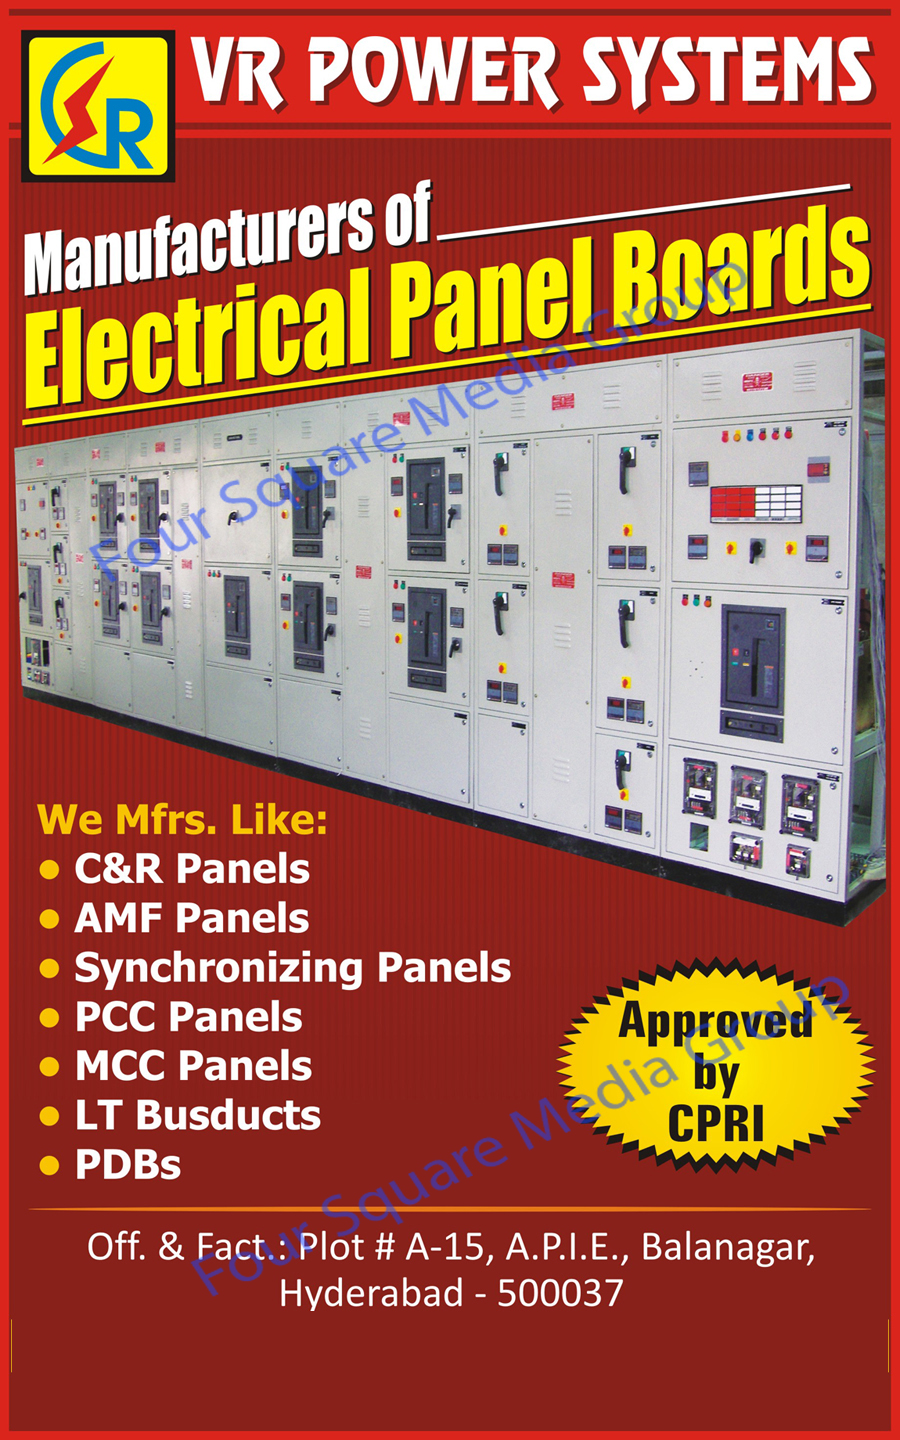 Electrical Panel Boards, C Panels, R Panels, AMF Panels, Synchronizing Panels, PCC Panels, MCC Panels, LT Bus ducts, PDBs